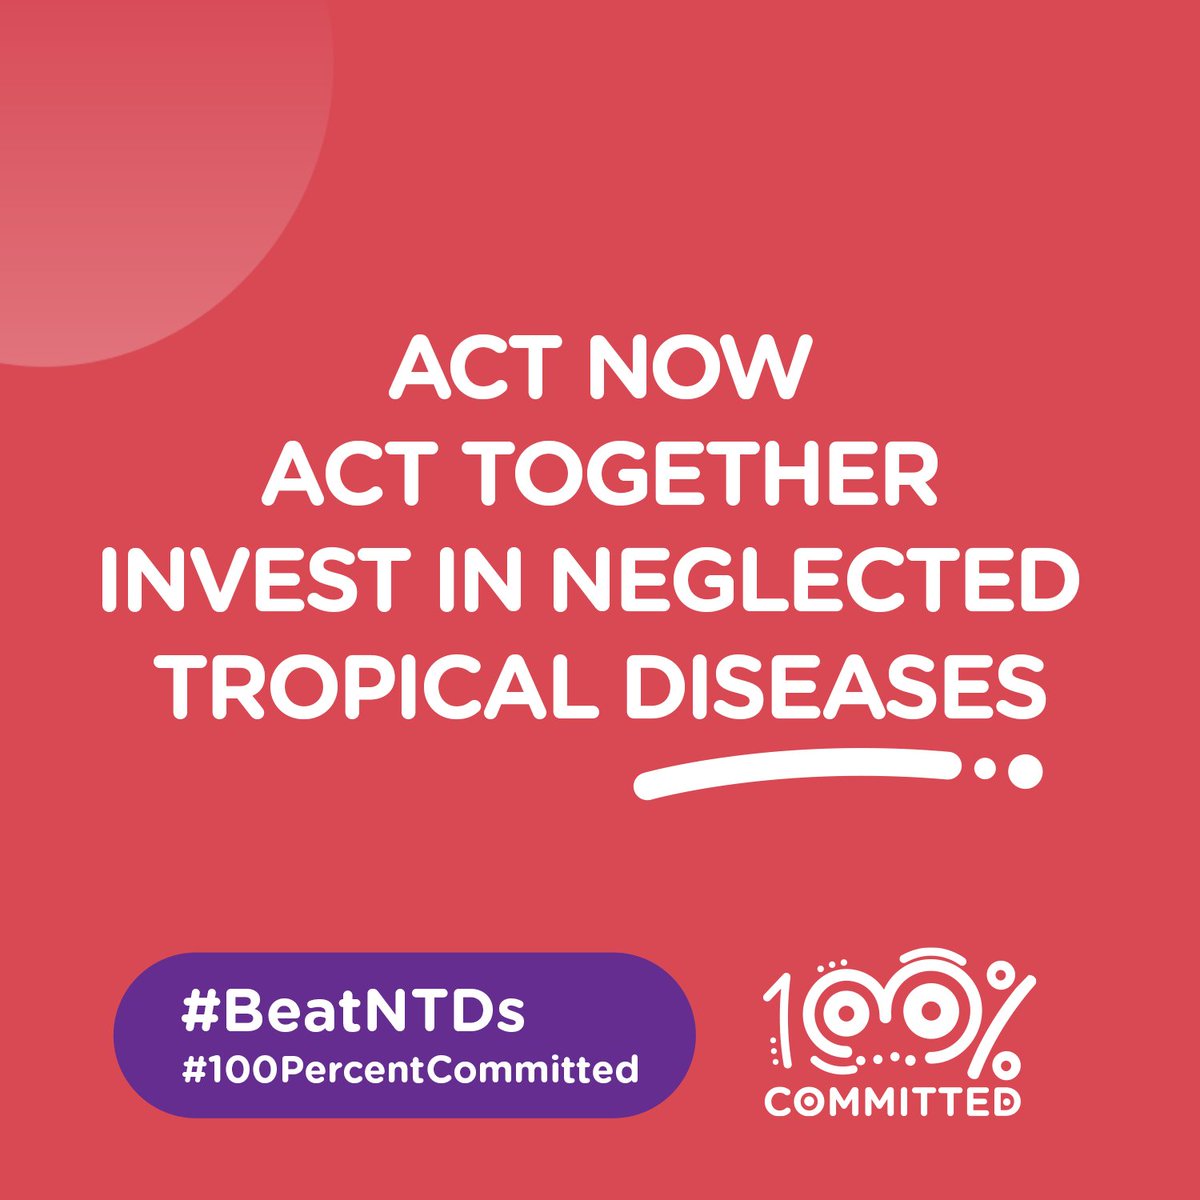 It’s #WorldNTDDay and @DrTedros highlighted that 8 countries were certified to have eliminated NTDs in the past year at  #EB152. We can definitely #BeatNTDs by 2030 if everyone is #100percentCommitted